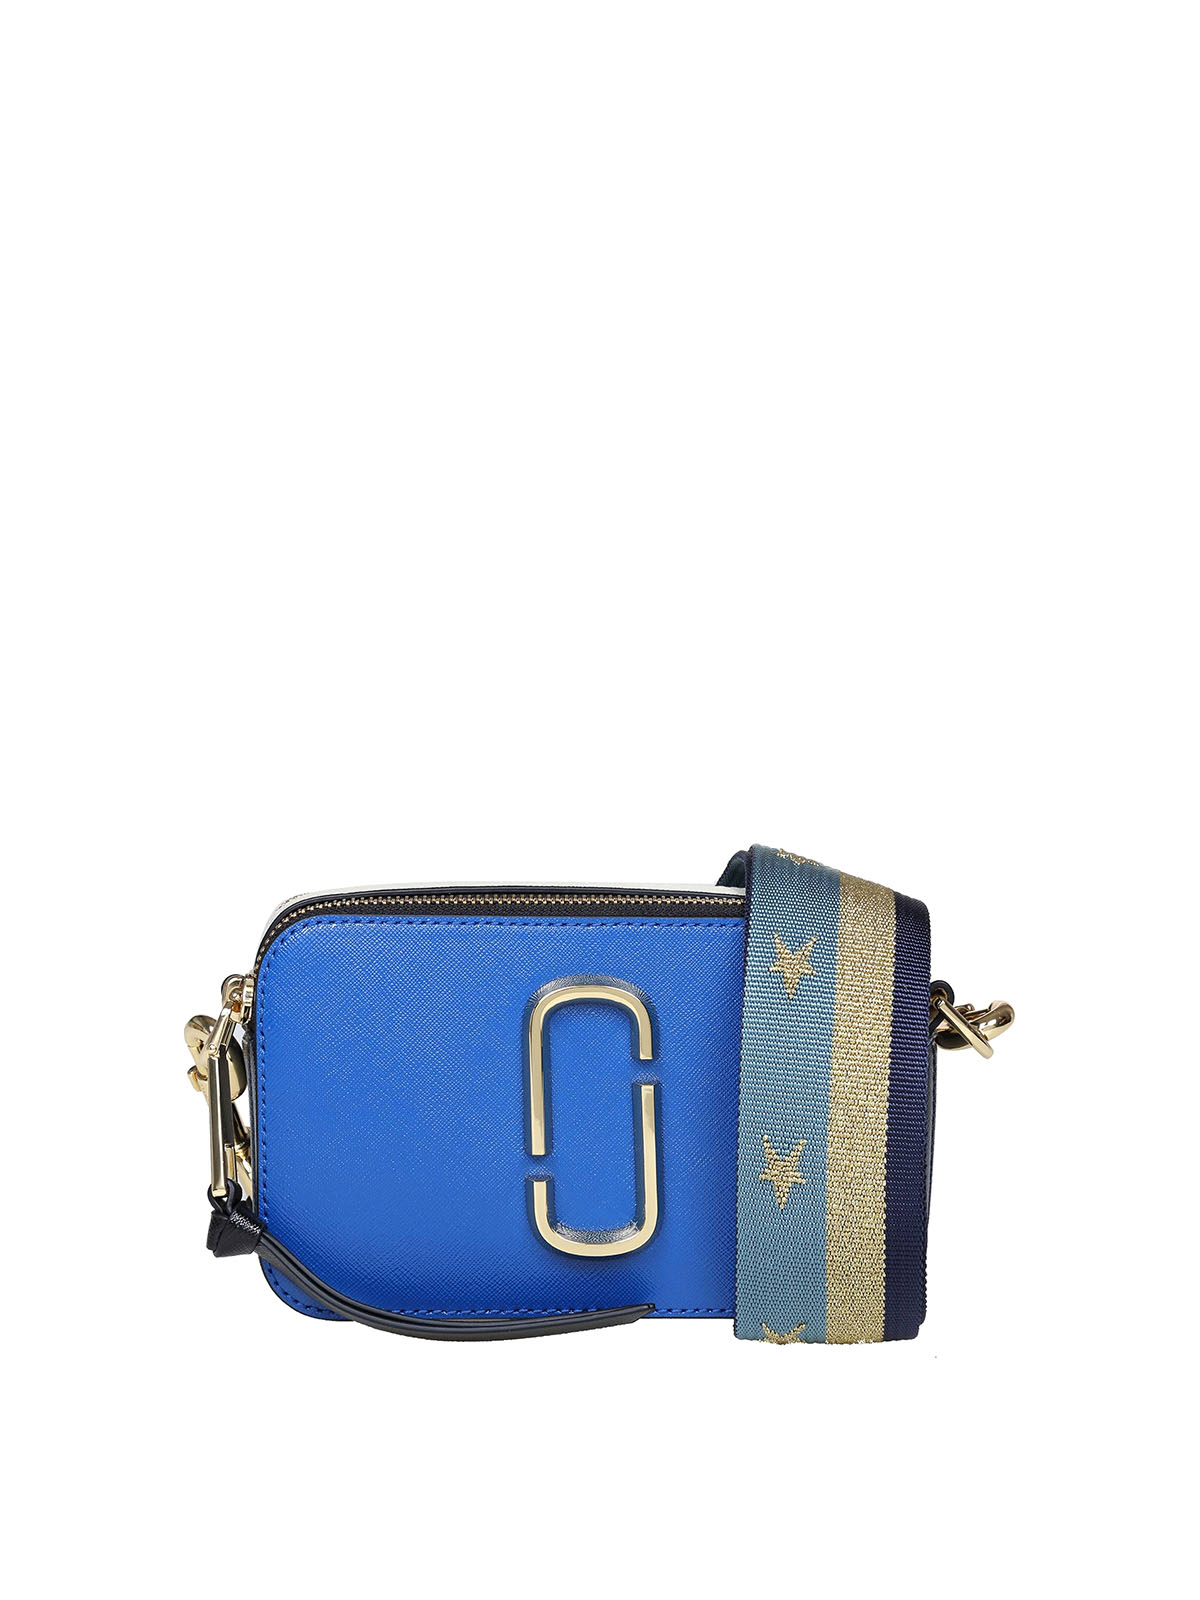 Marc Jacobs Blue & Yellow 'The Snapshot' Bag